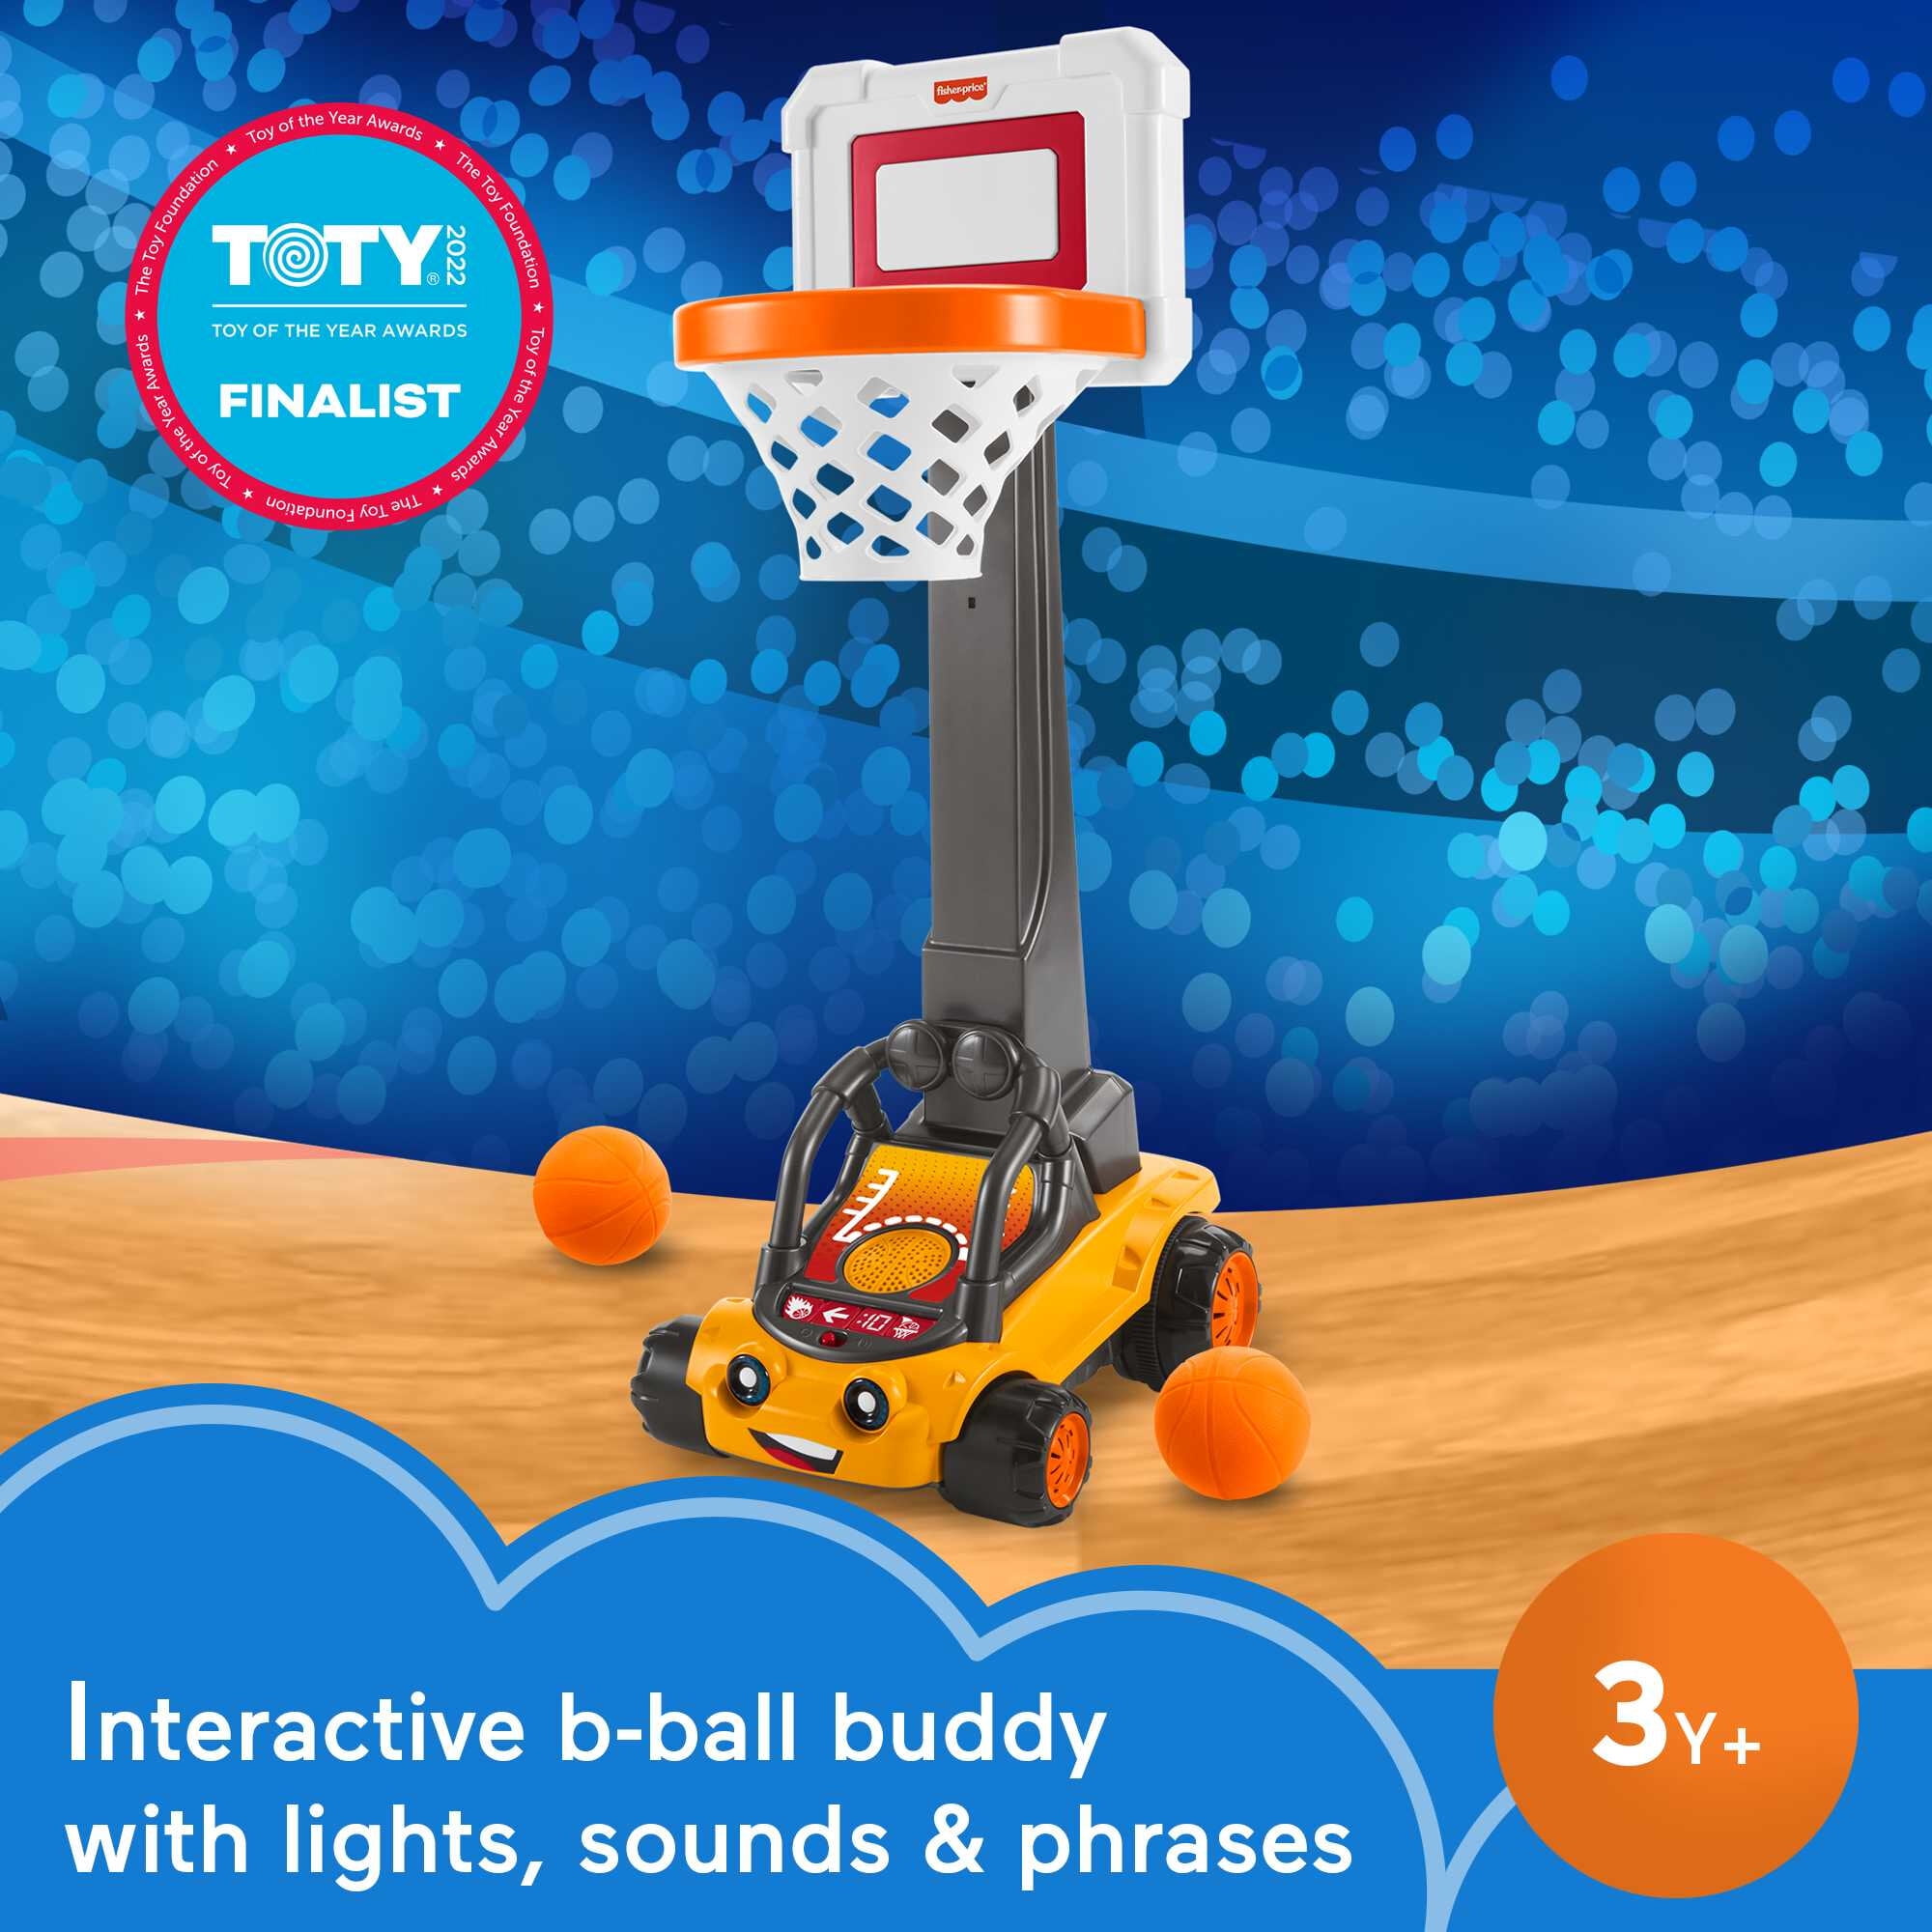 Fisher-Price B.B. Hoopster Electronic Basketball Toy - 1